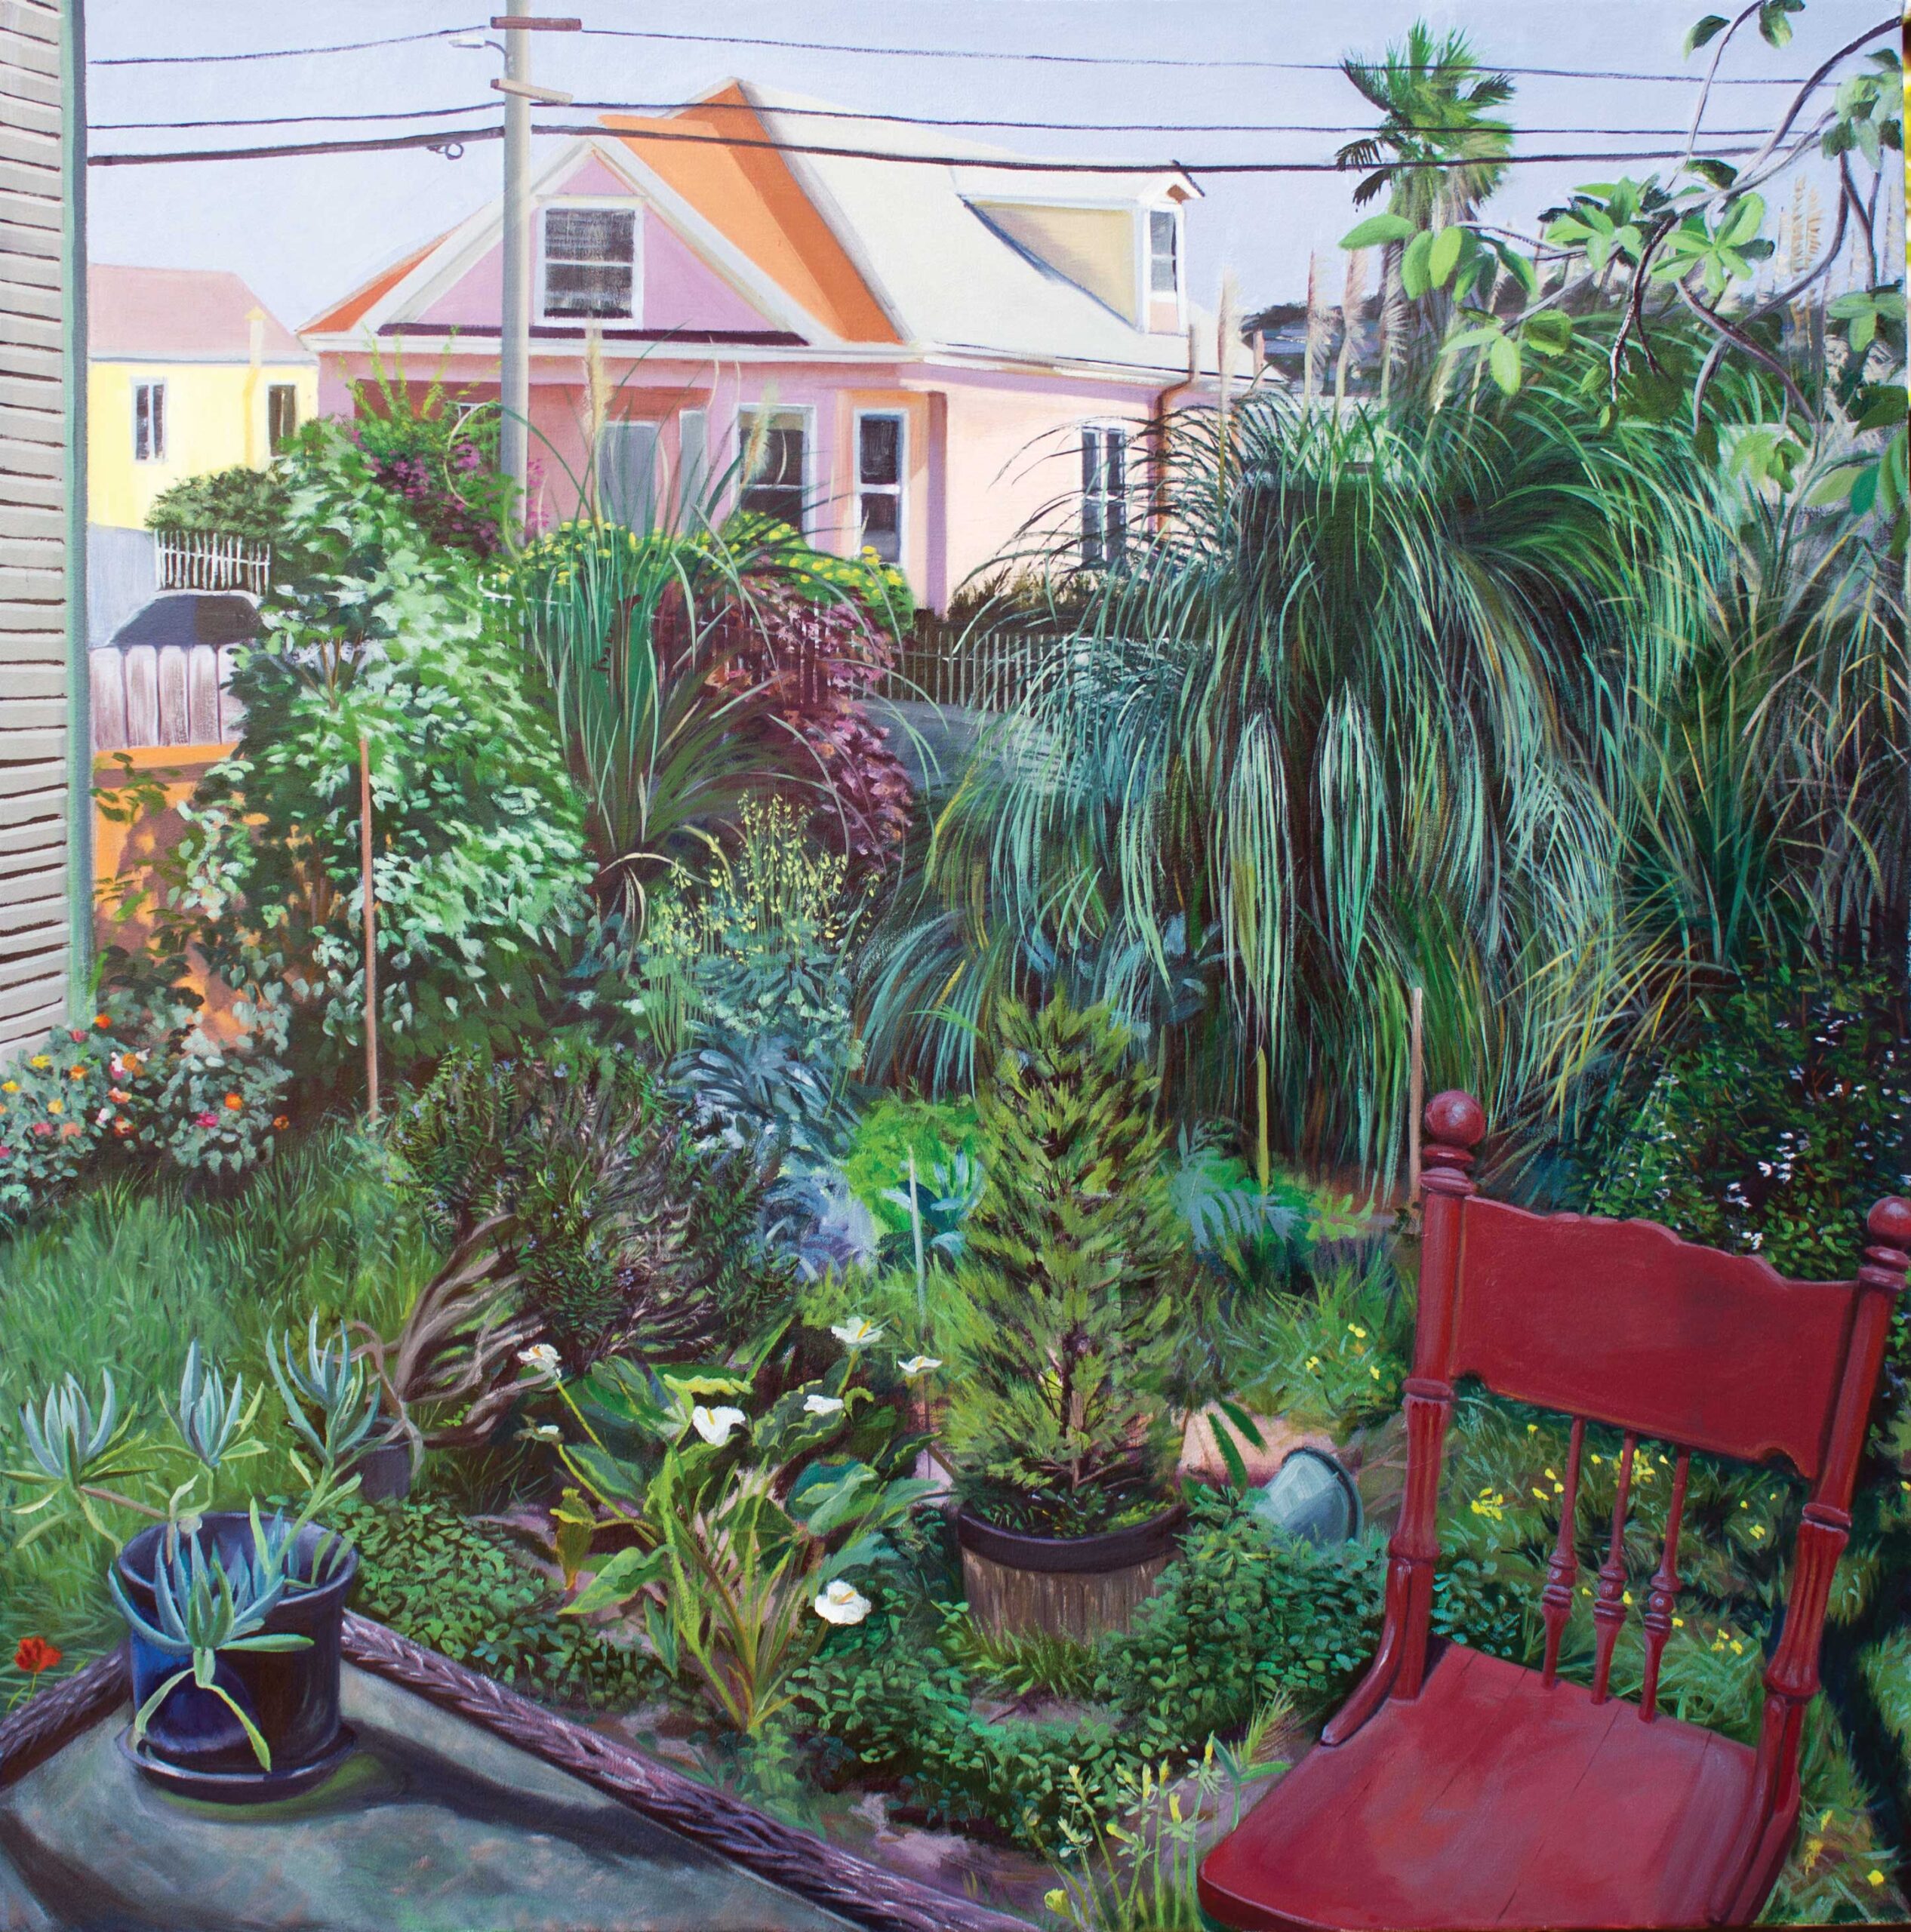 Tom Colcord, "The Backyard … Or at Least How I Remember It," 2021, oil, 30 x 30 in., private collection, plein air